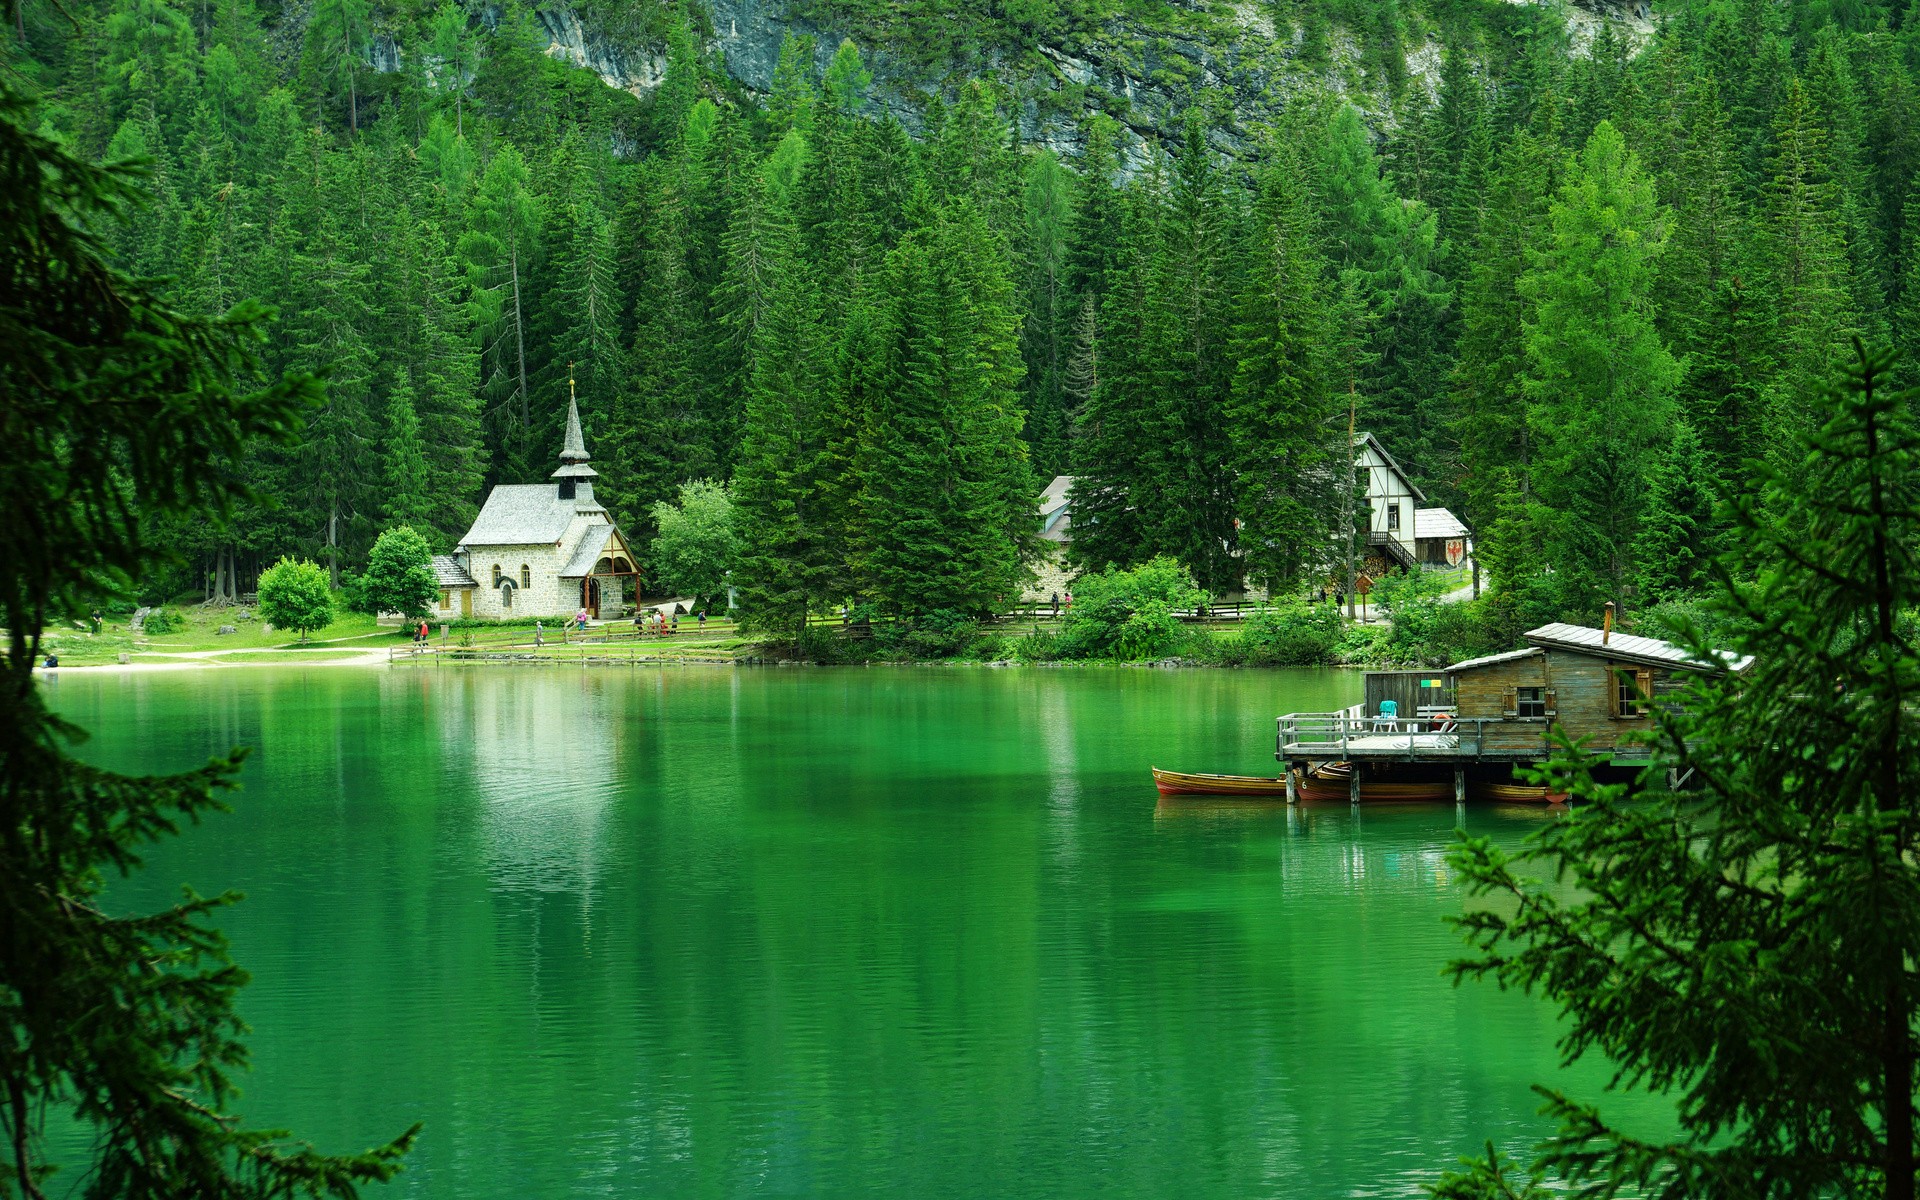 General 1920x1200 nature landscape mountains trees forest house lake Italy church rocks boat reflection green Pragser Wildsee South Tyrol Alps